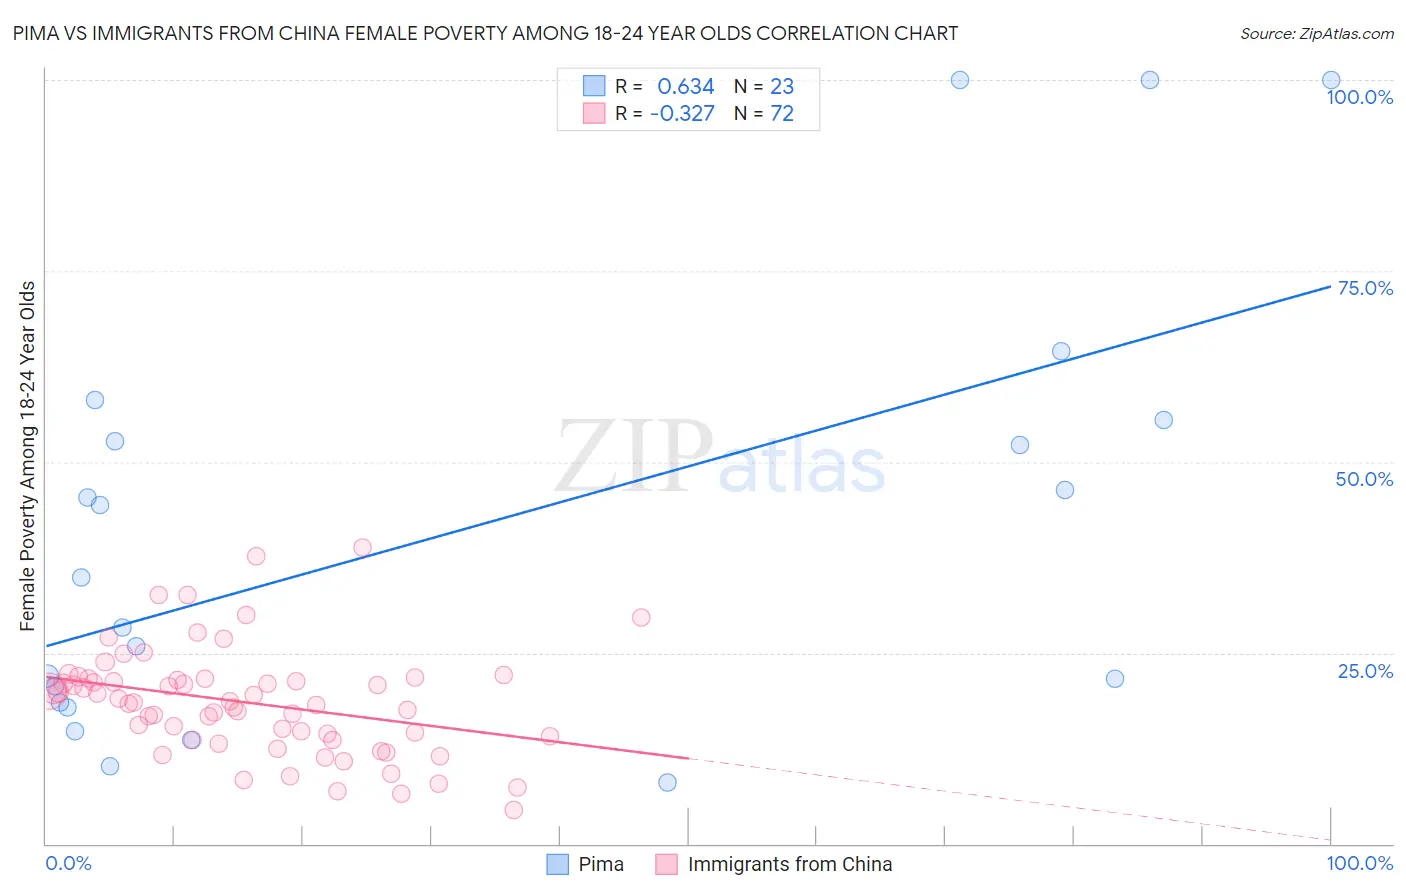 Pima vs Immigrants from China Female Poverty Among 18-24 Year Olds